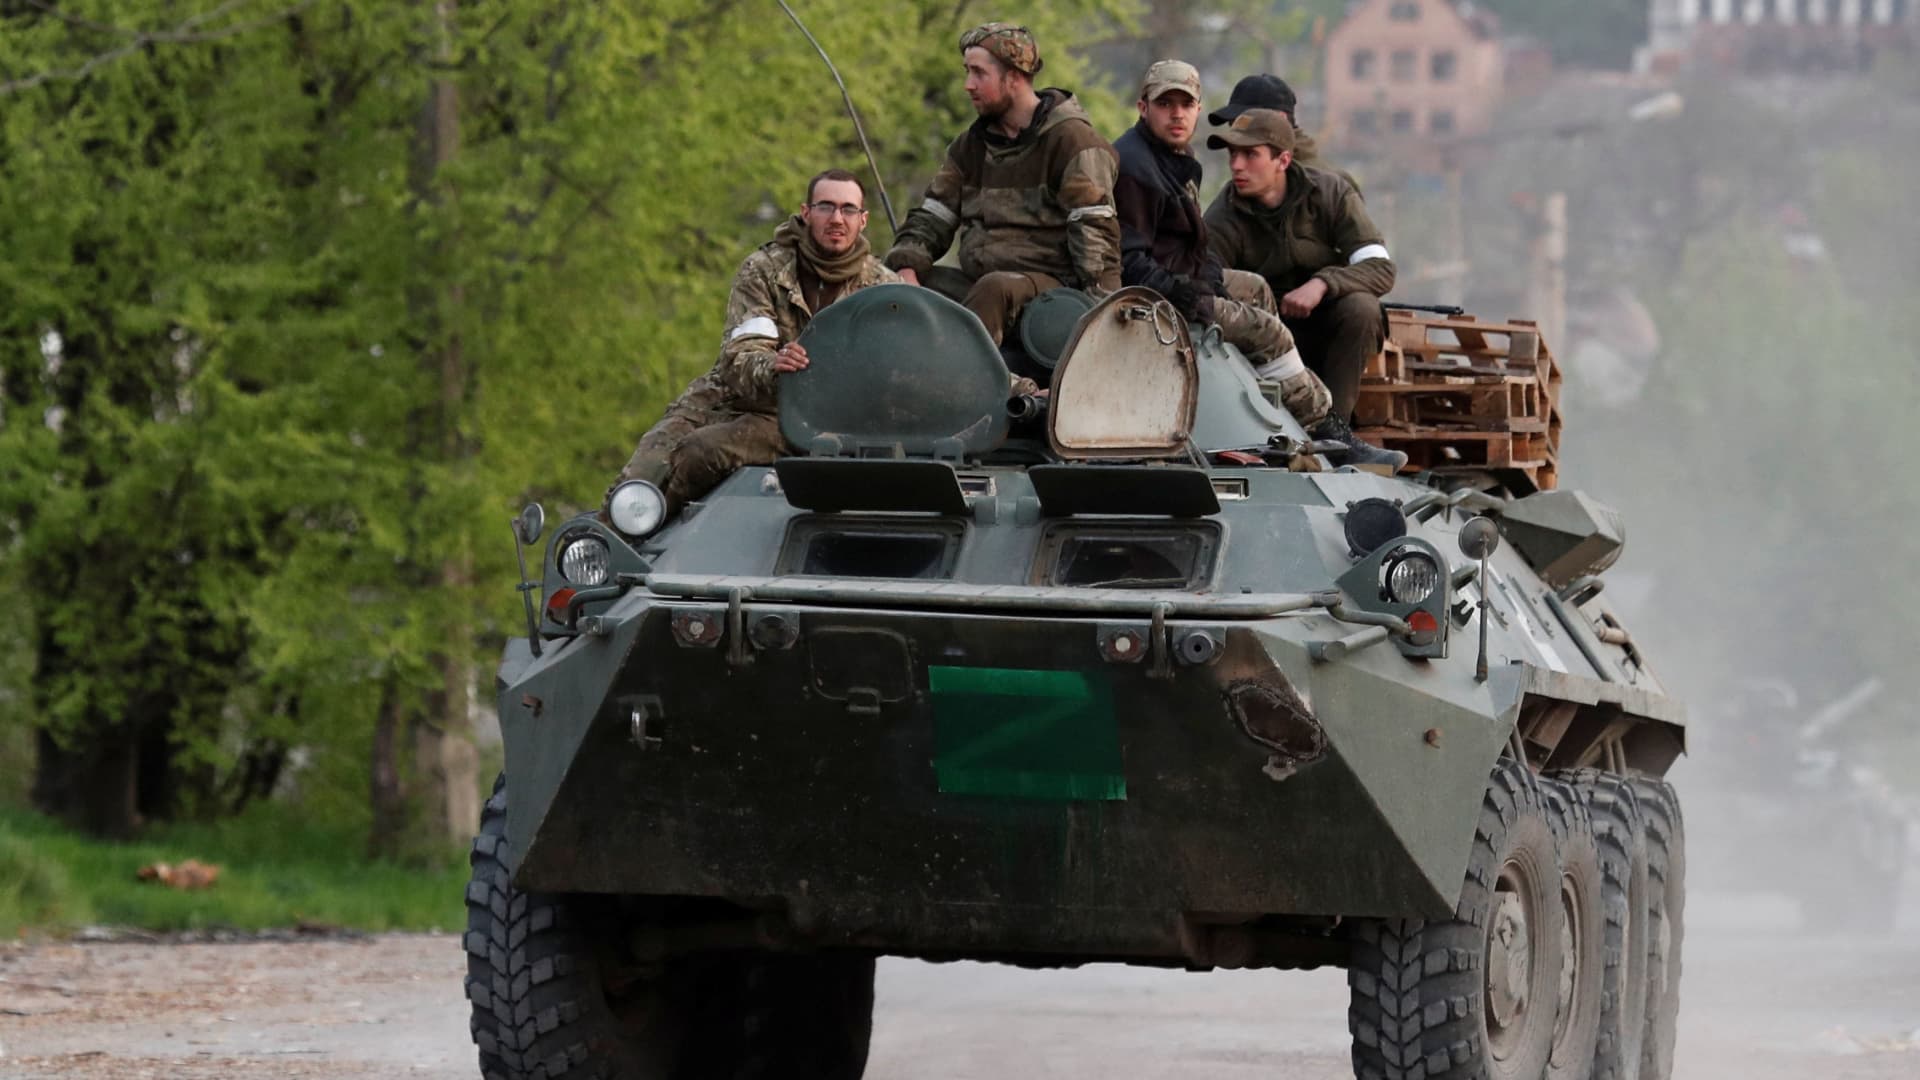 Service members of pro-Russian troops ride an armored personnel carrier during fighting in Ukraine-Russia conflict near the Azovstal steel plant in the southern port city of Mariupol, Ukraine May 5, 2022.